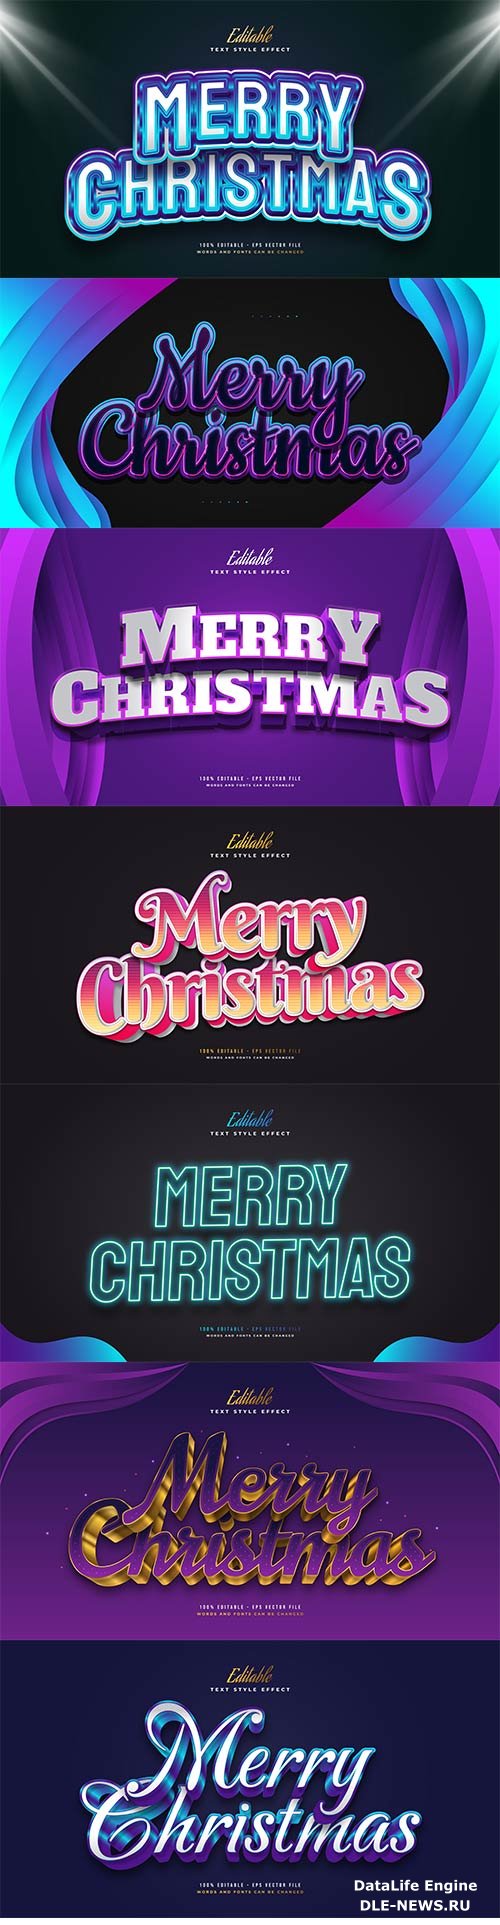 Merry christmas and happy new year 2022 editable vector text effects vol 22